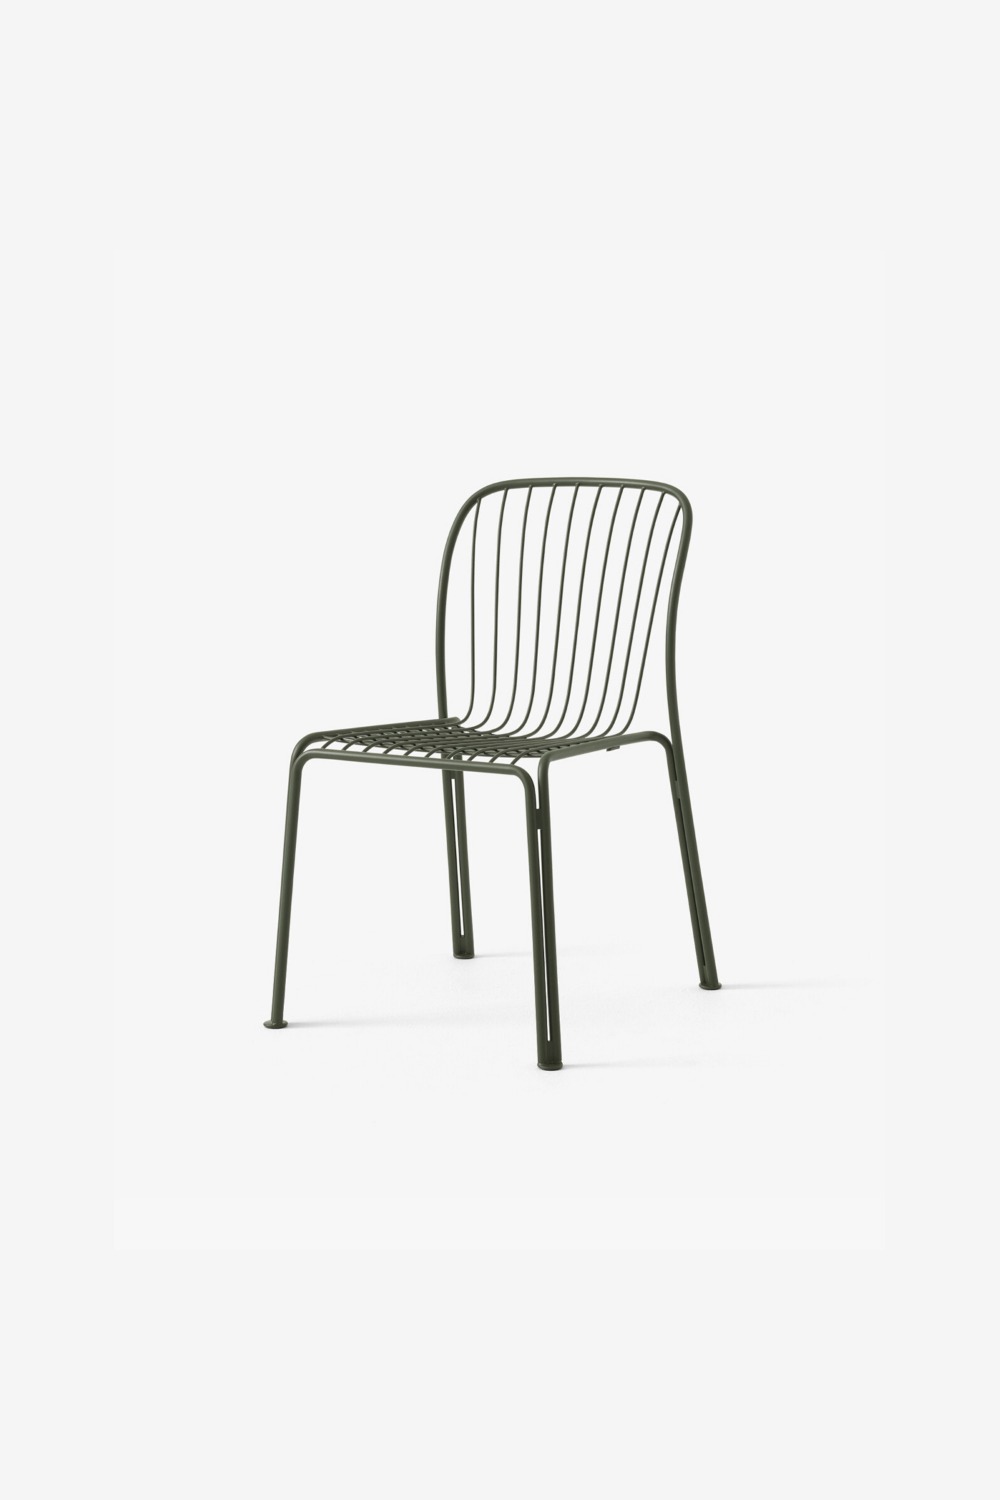 [&amp;Tradition] Thorvald Sidechair /SC94 (Bronze Green)